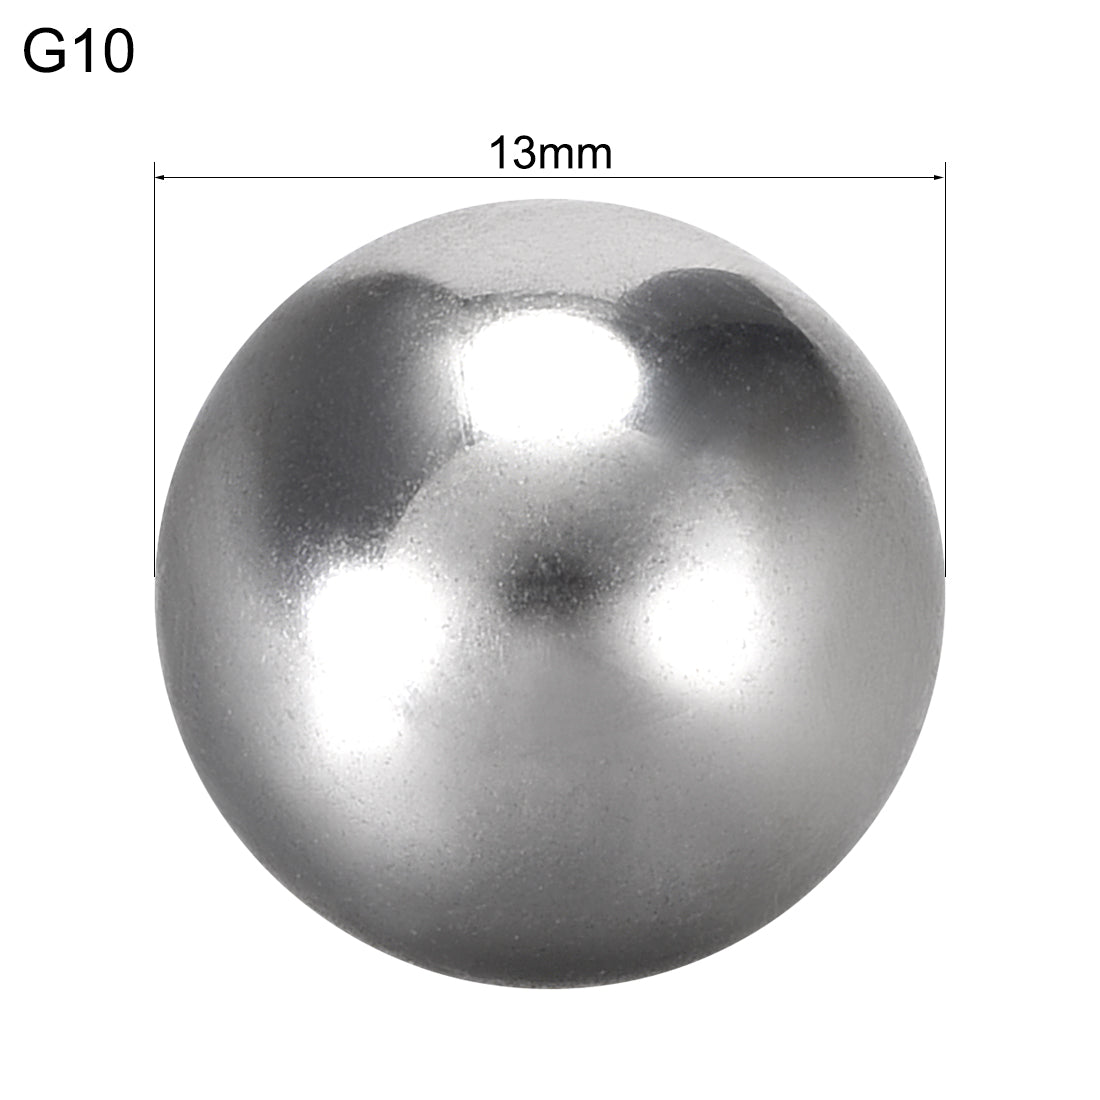 uxcell Uxcell Precision Balls 11mm Solid Chrome Steel G10 for Ball Bearing Wheel 10pcs